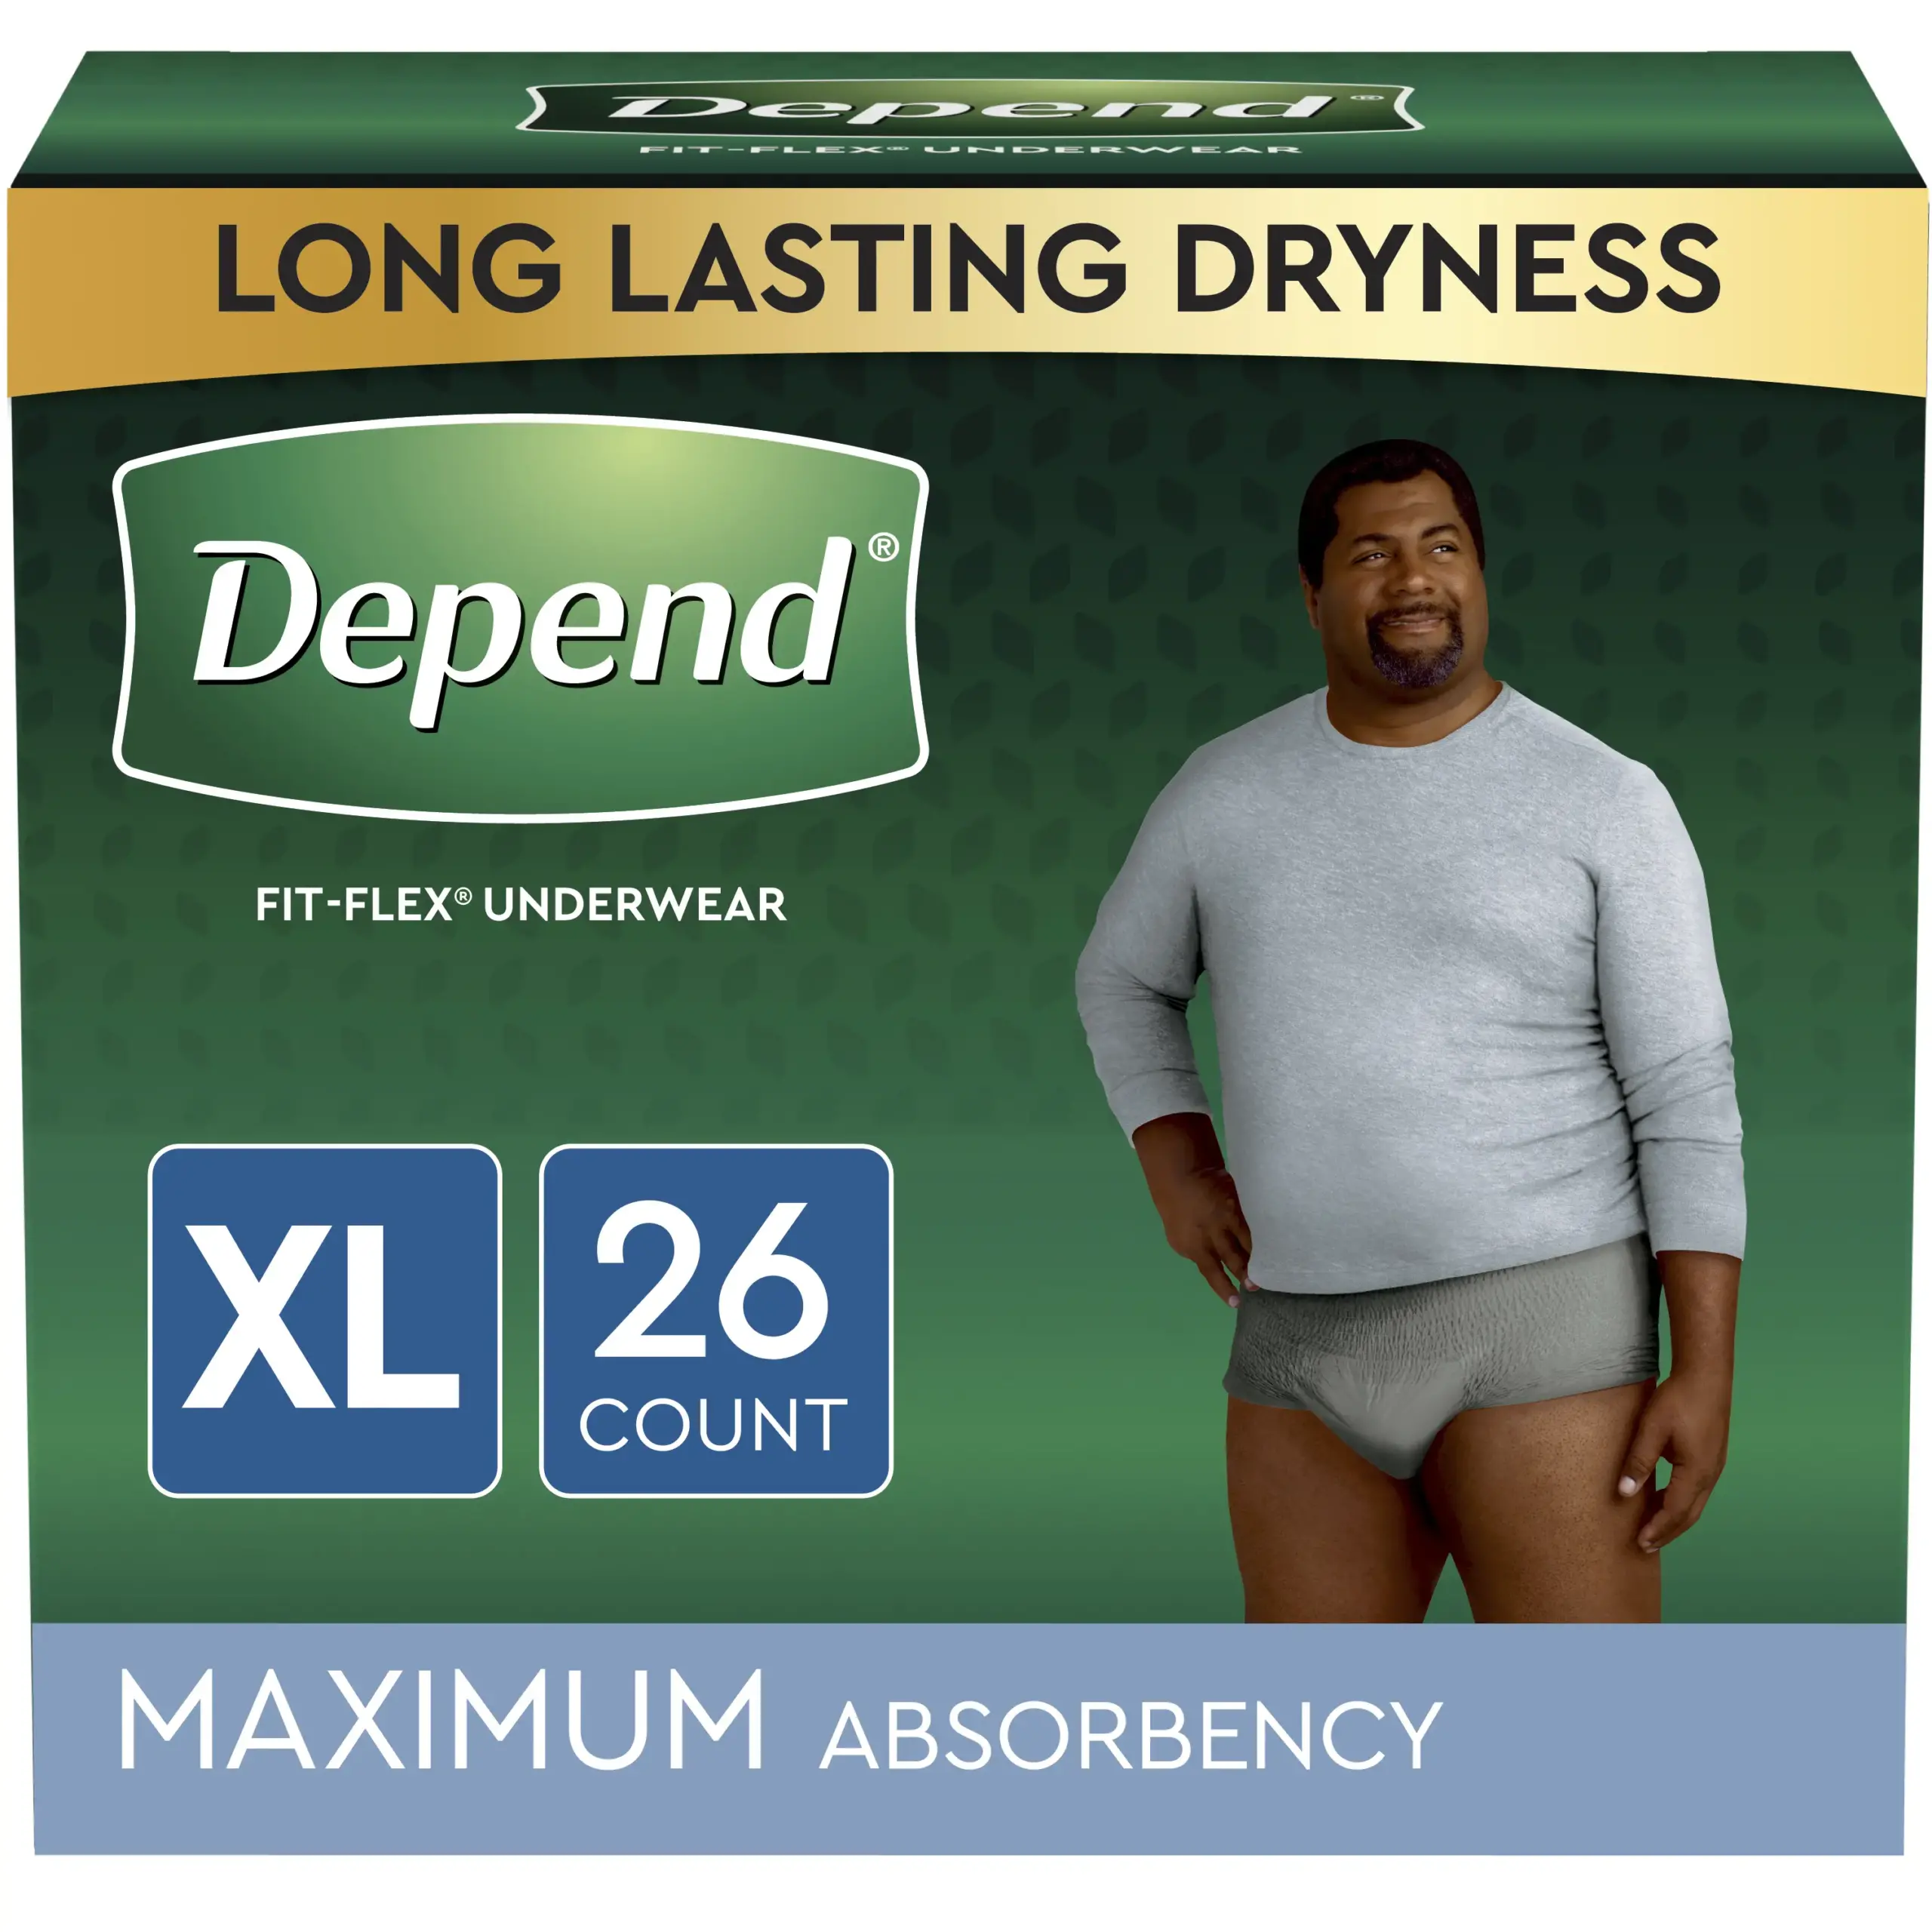 Depend FIT-FLEX Incontinence Underwear for Men, Maximum Absorbency, XL, Gray, 26 Count, Replaces Item 6947933